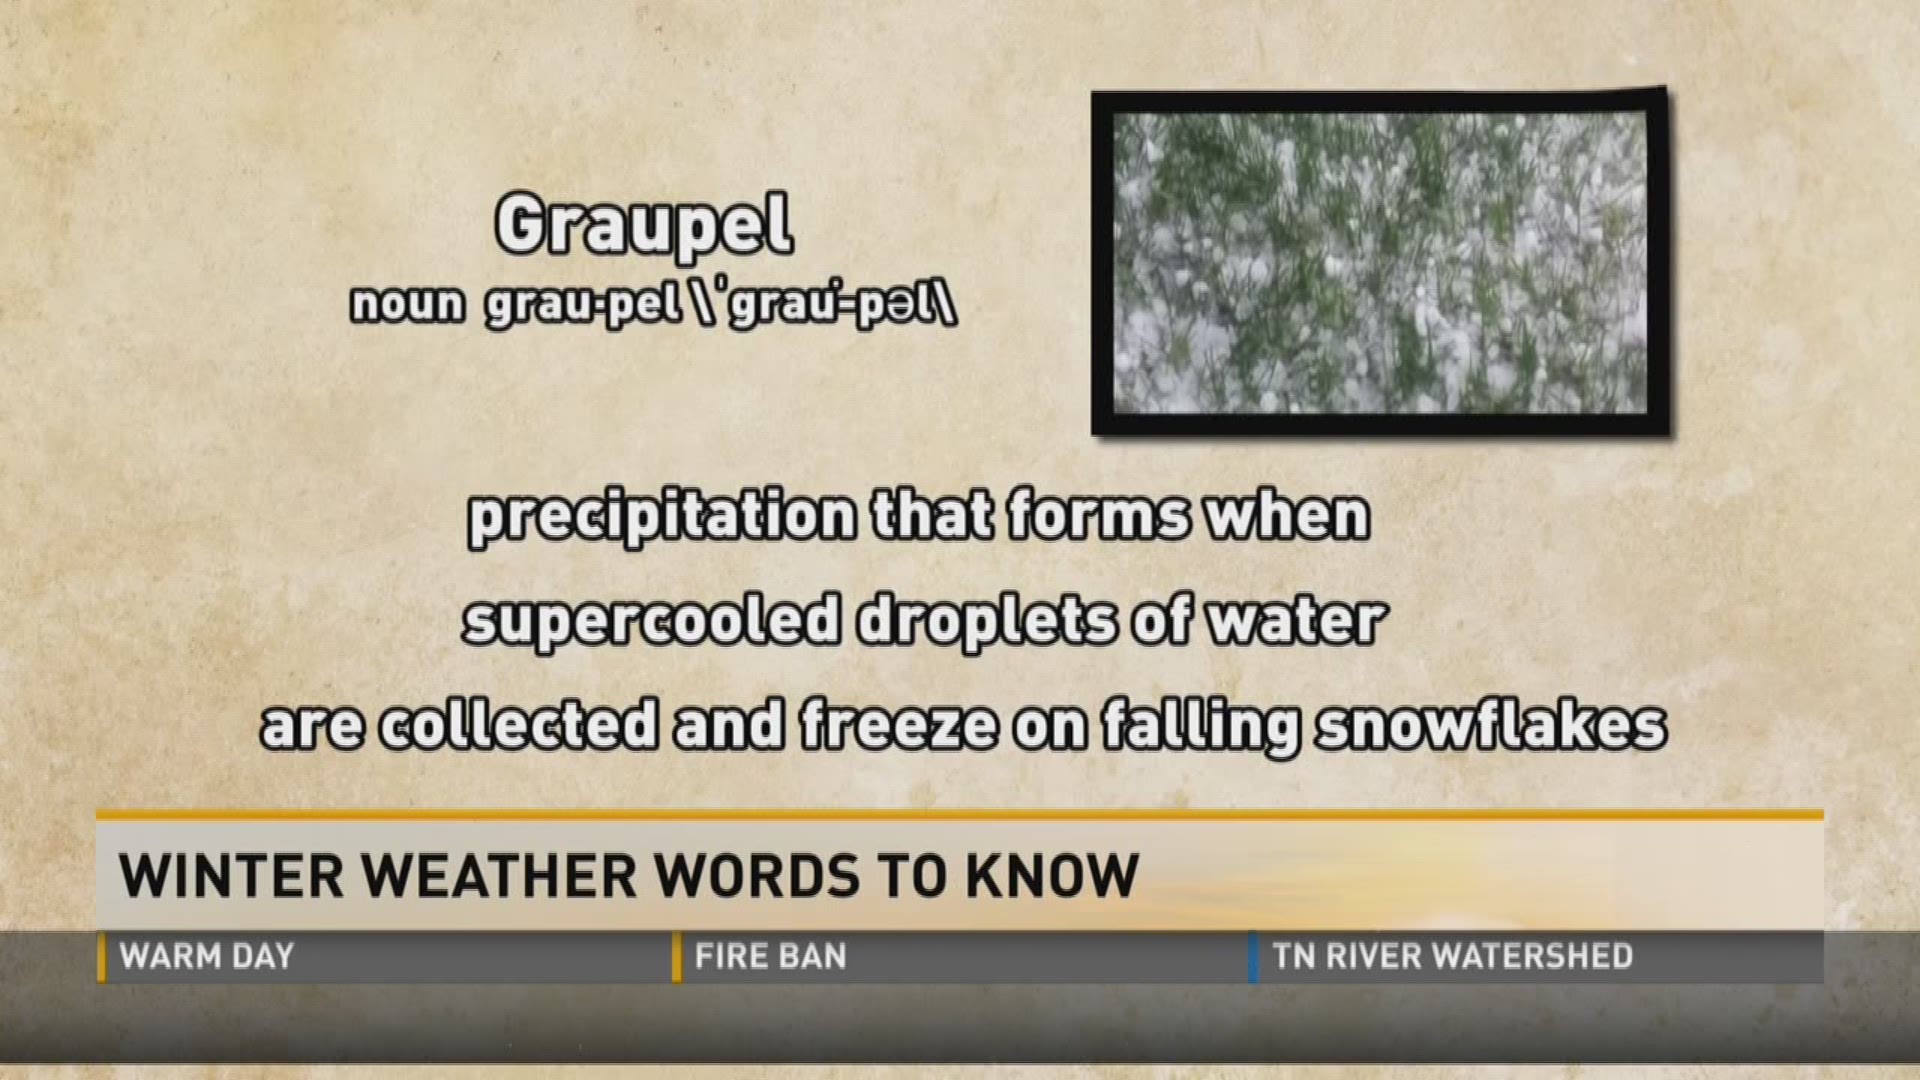 Meteorologist Matt Sanderson tells viewers which winter weather words they need to know.